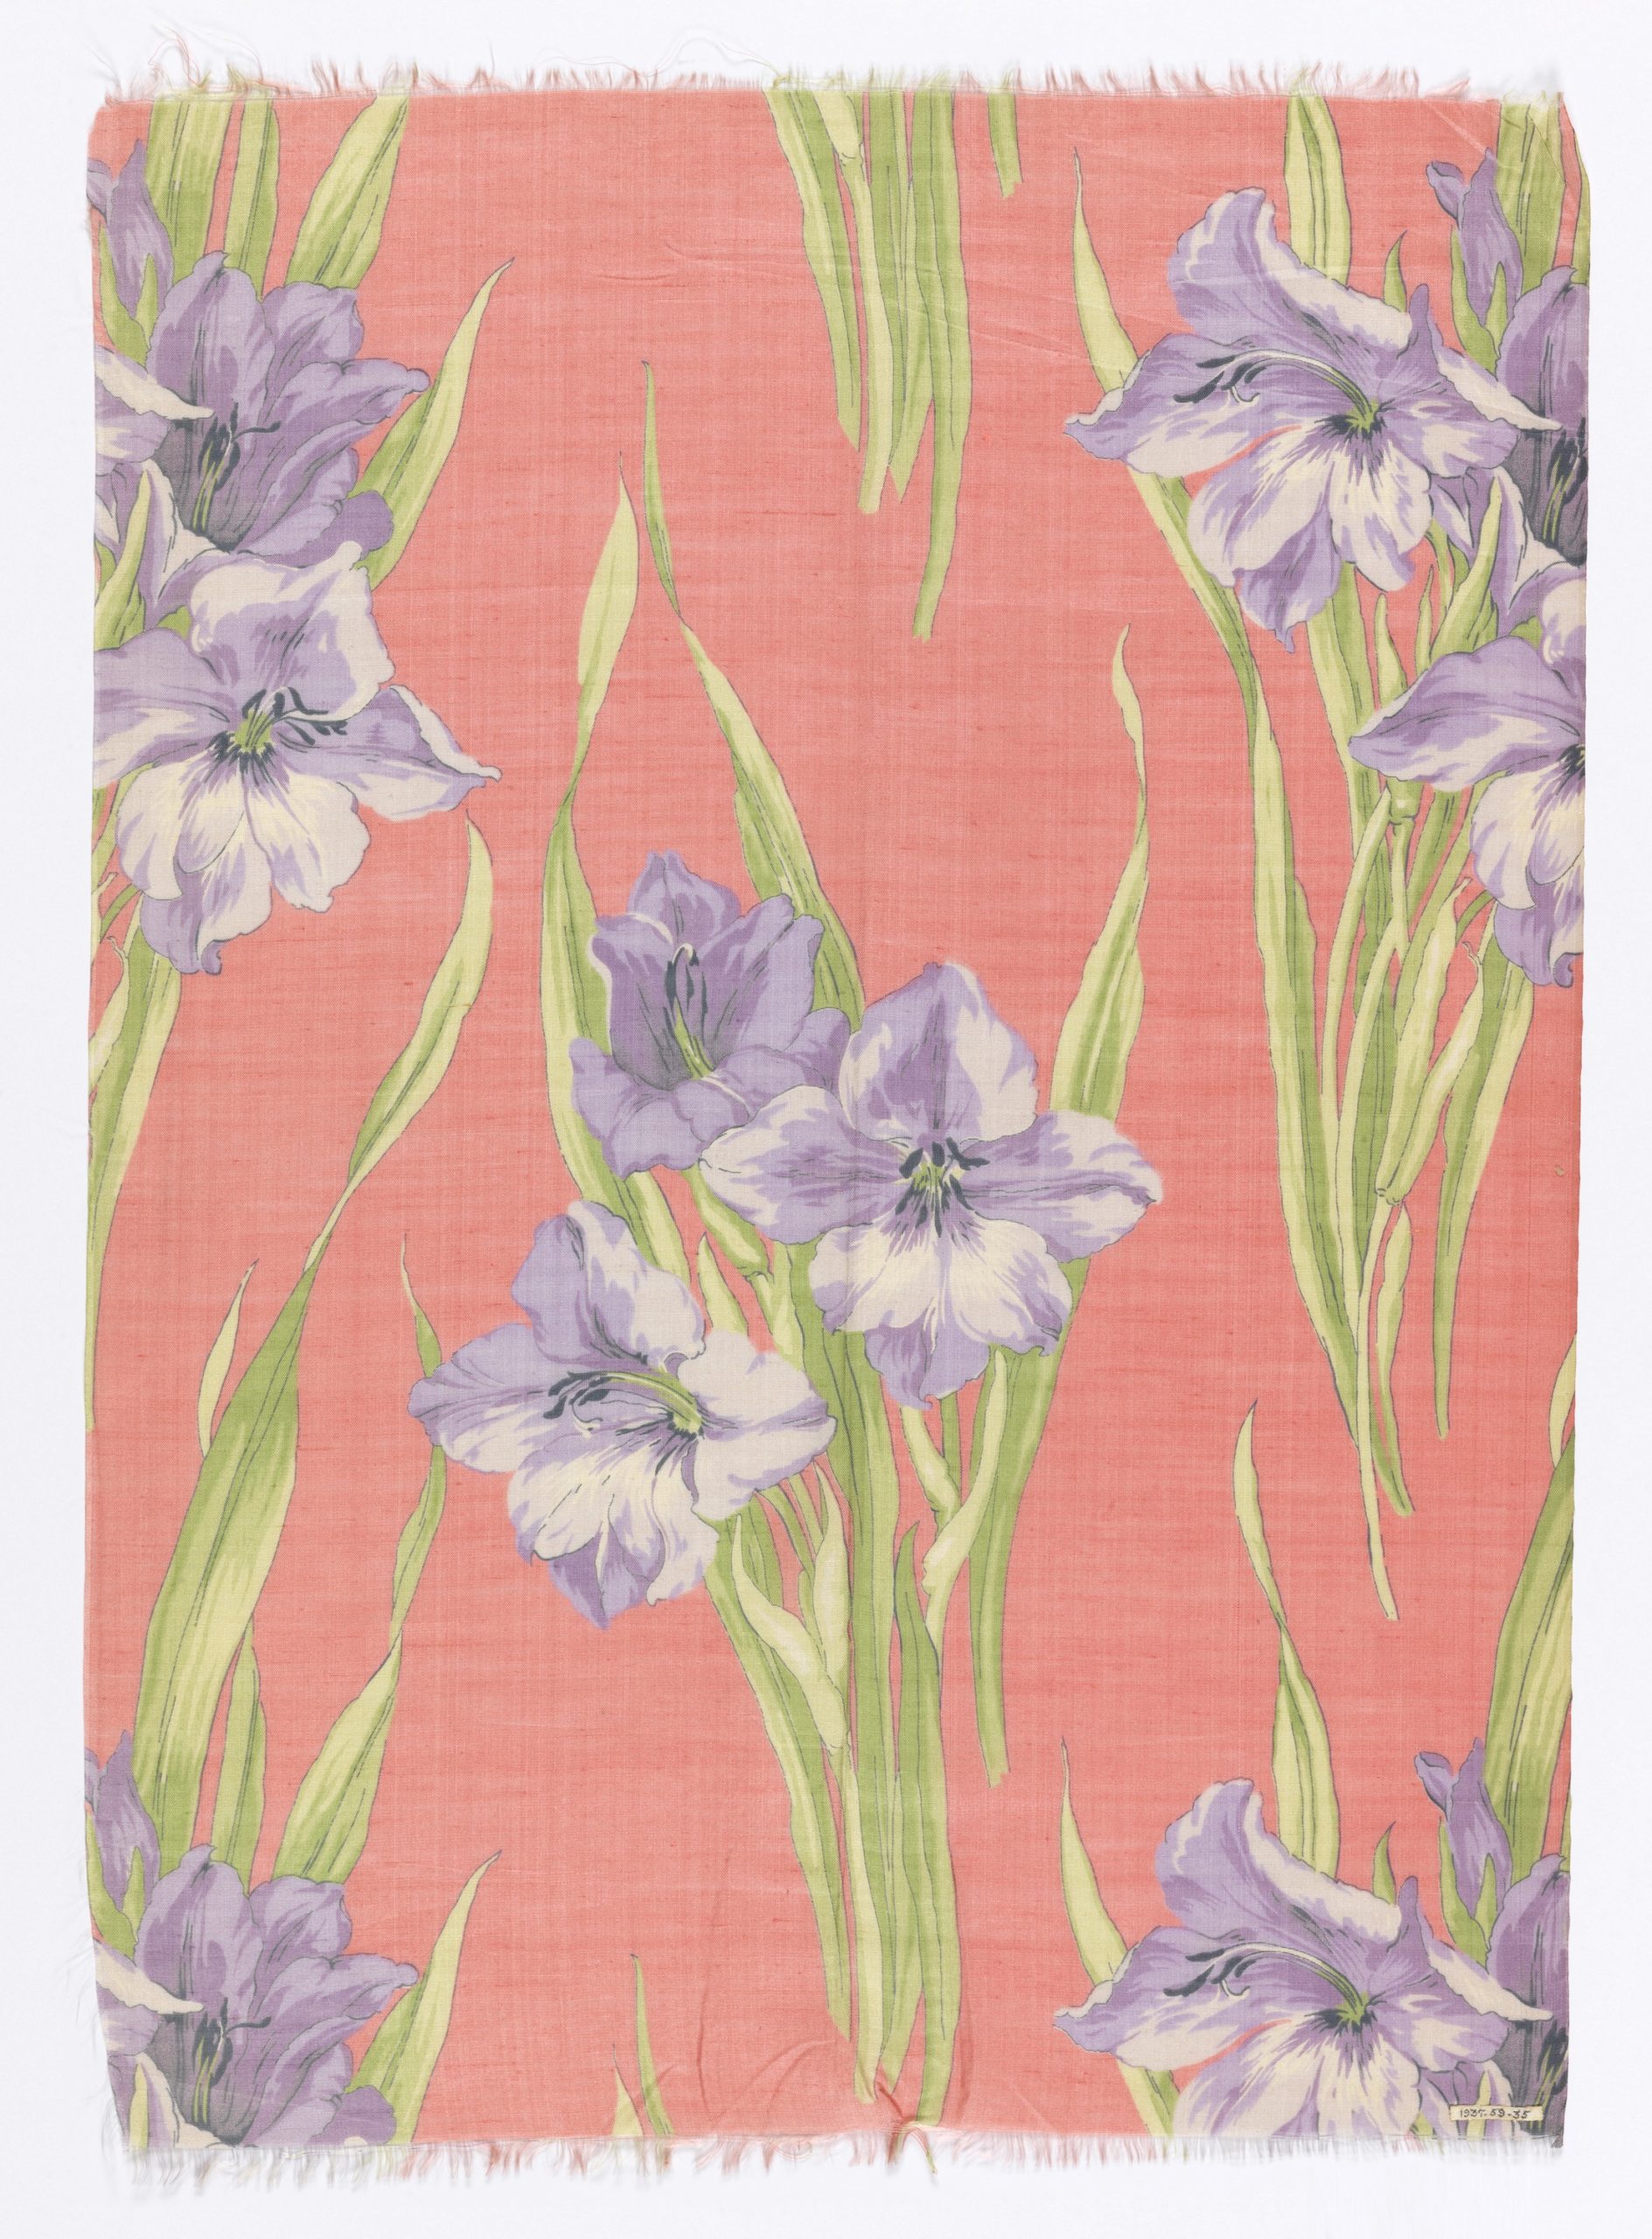 Purple flowers with green stems are grouped in trios against a pastel salmon background.